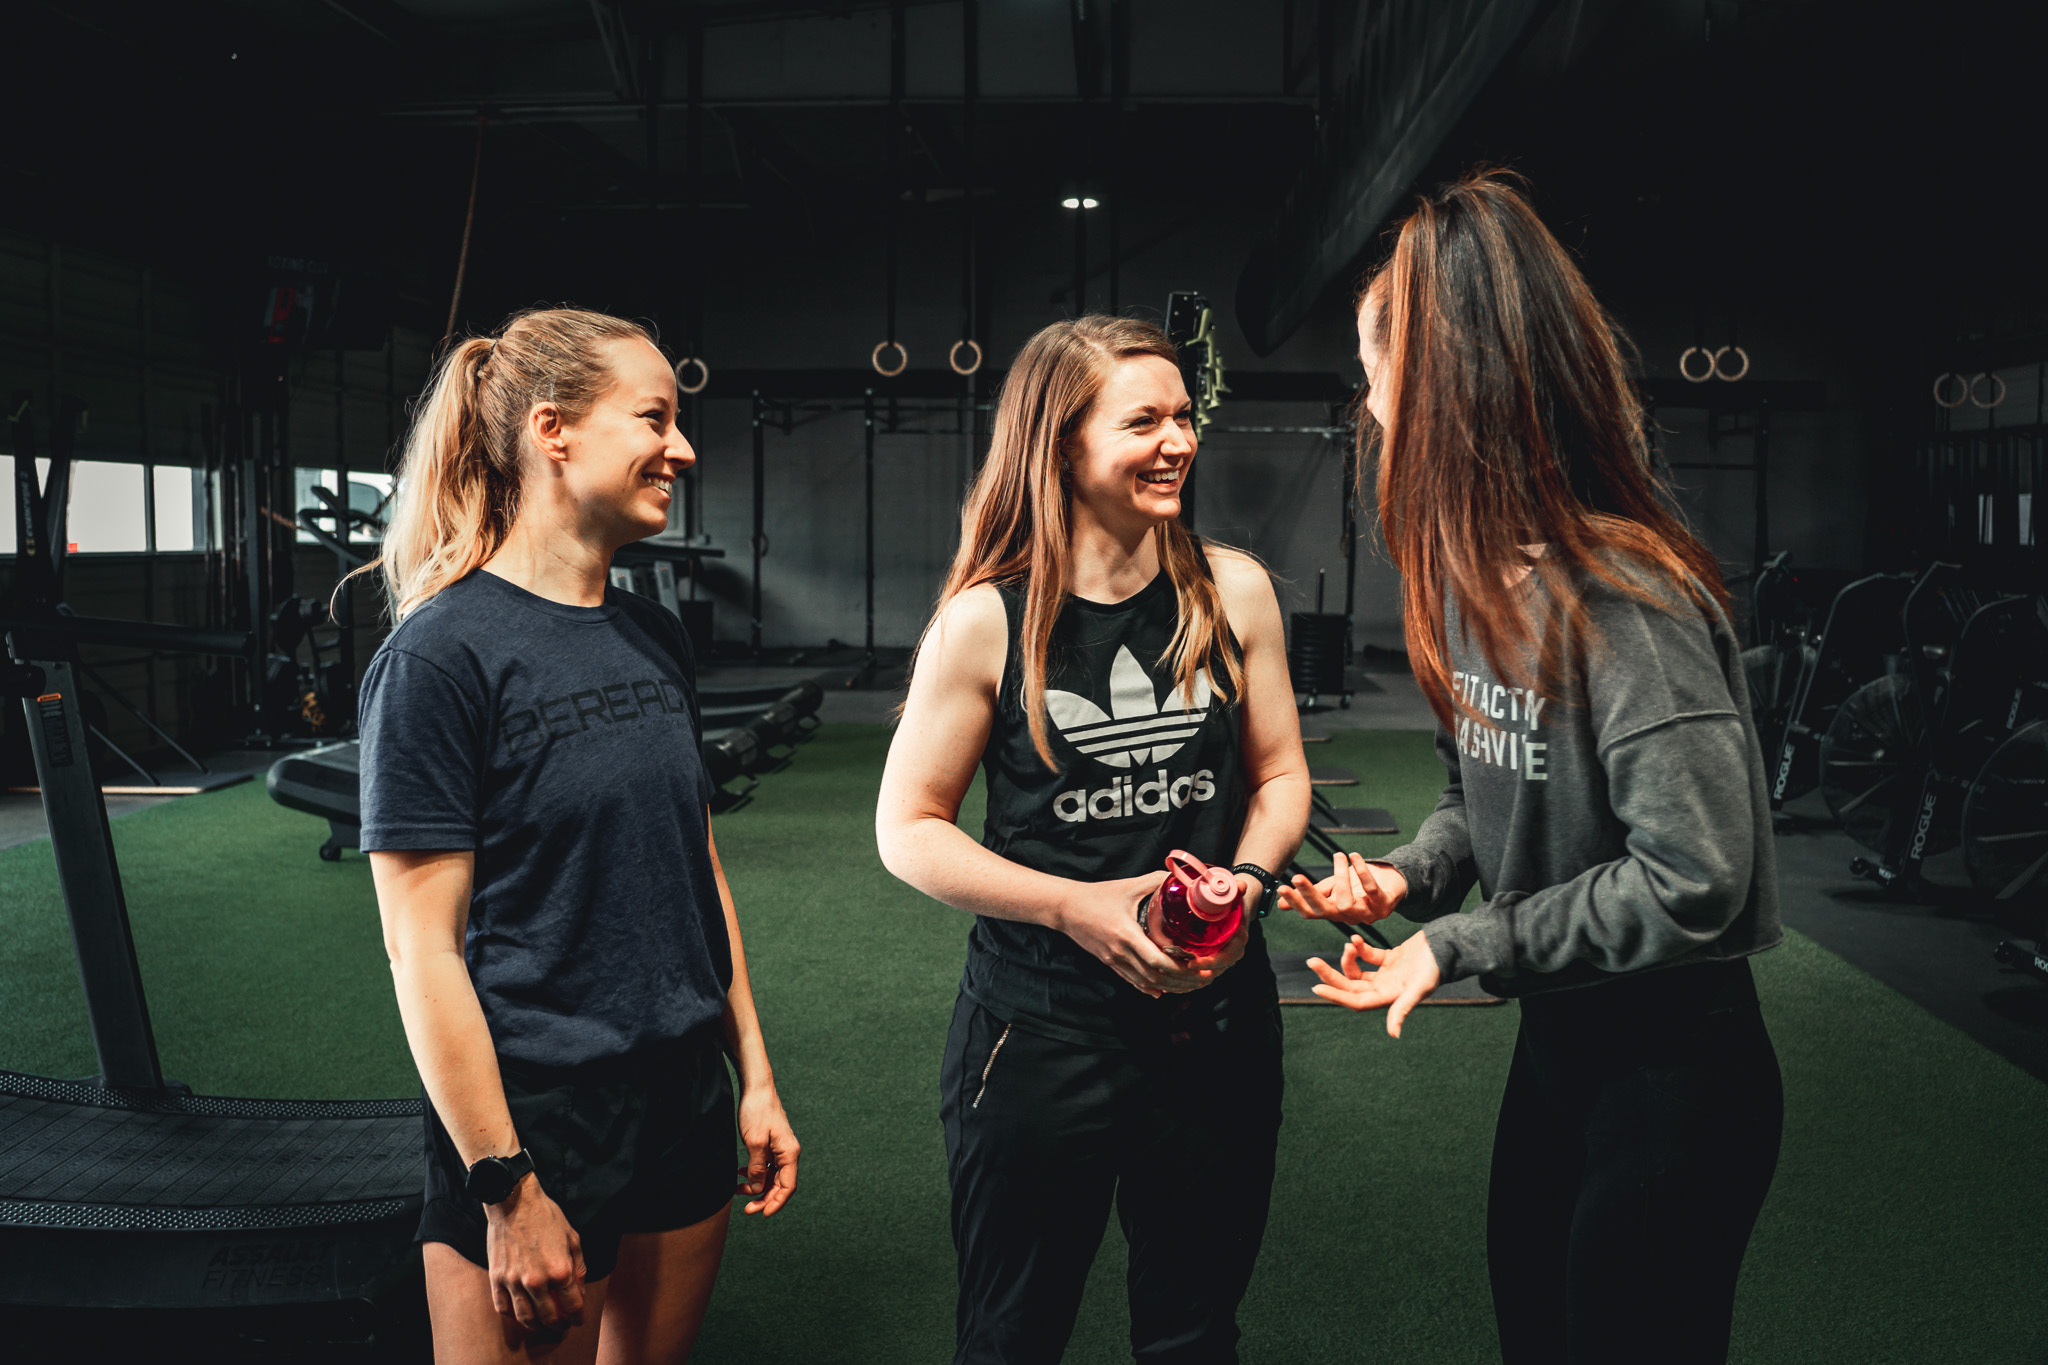 Three women in a gym talking to each other.